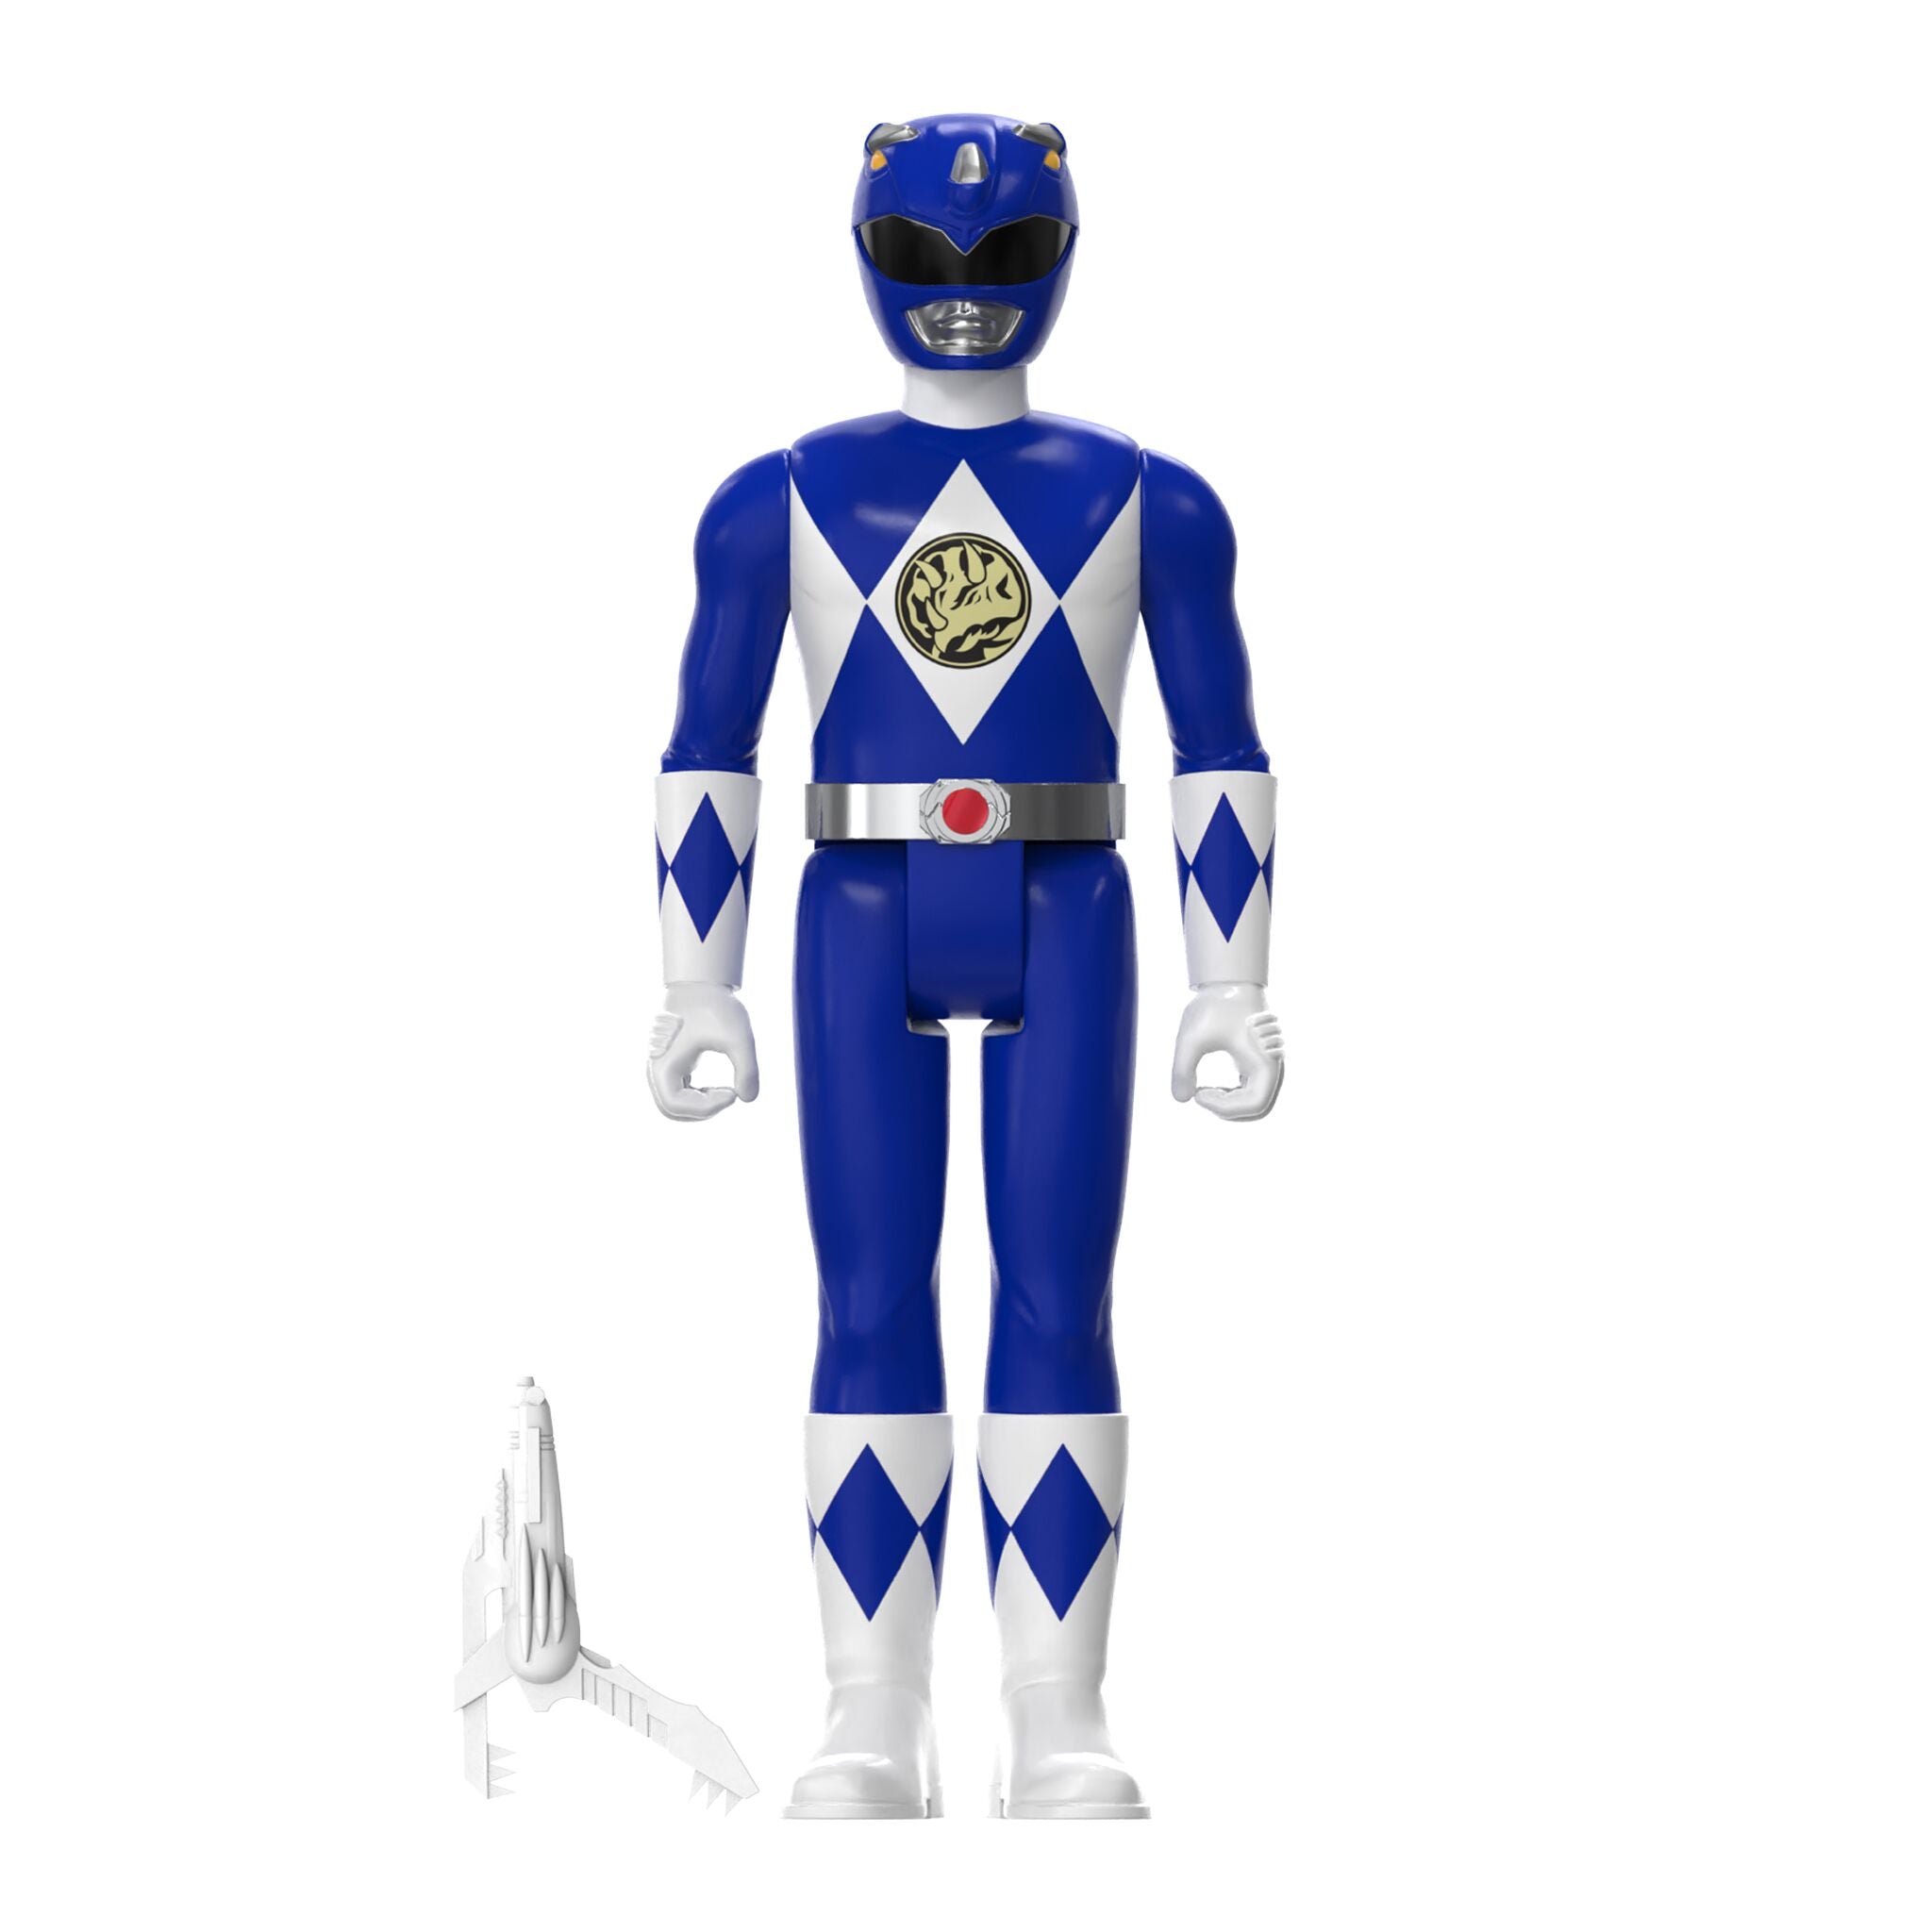 Mighty Morphin Power Rangers ReAction SDCC 2023 - Blue Ranger [Triangle Box] [SDCC 2023]